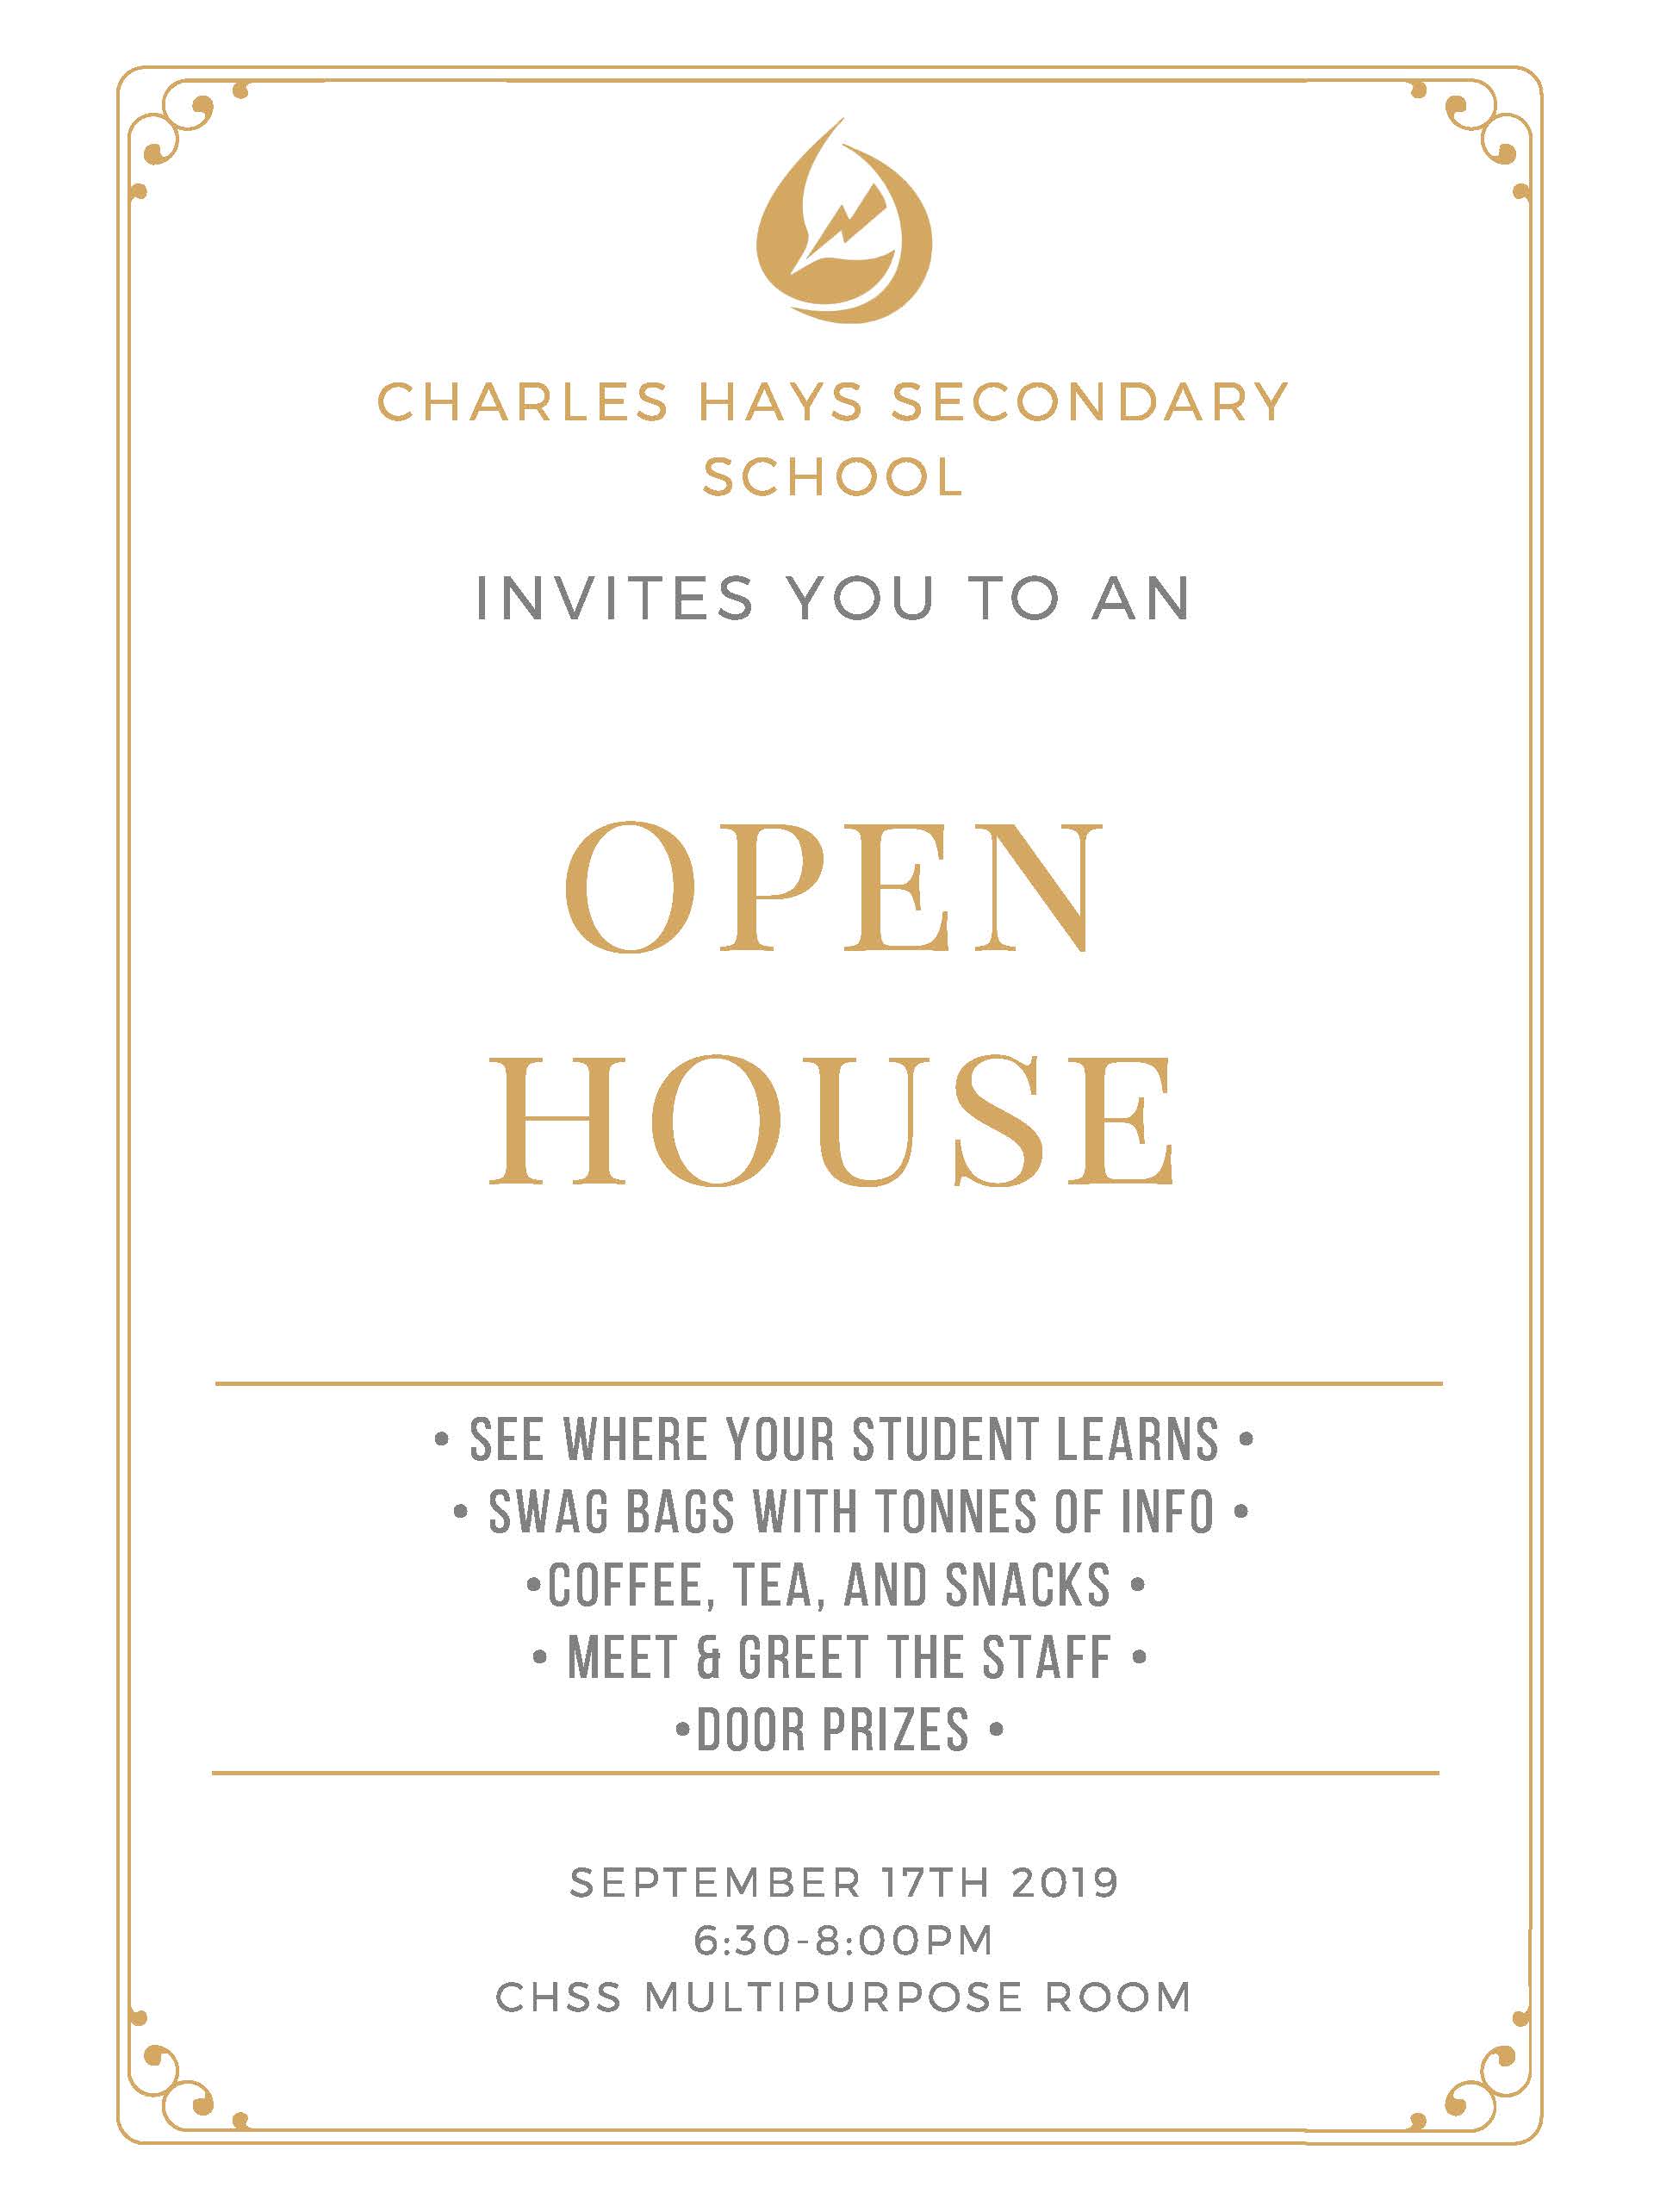 Youre Invited To An Open House Charles Hays Secondary